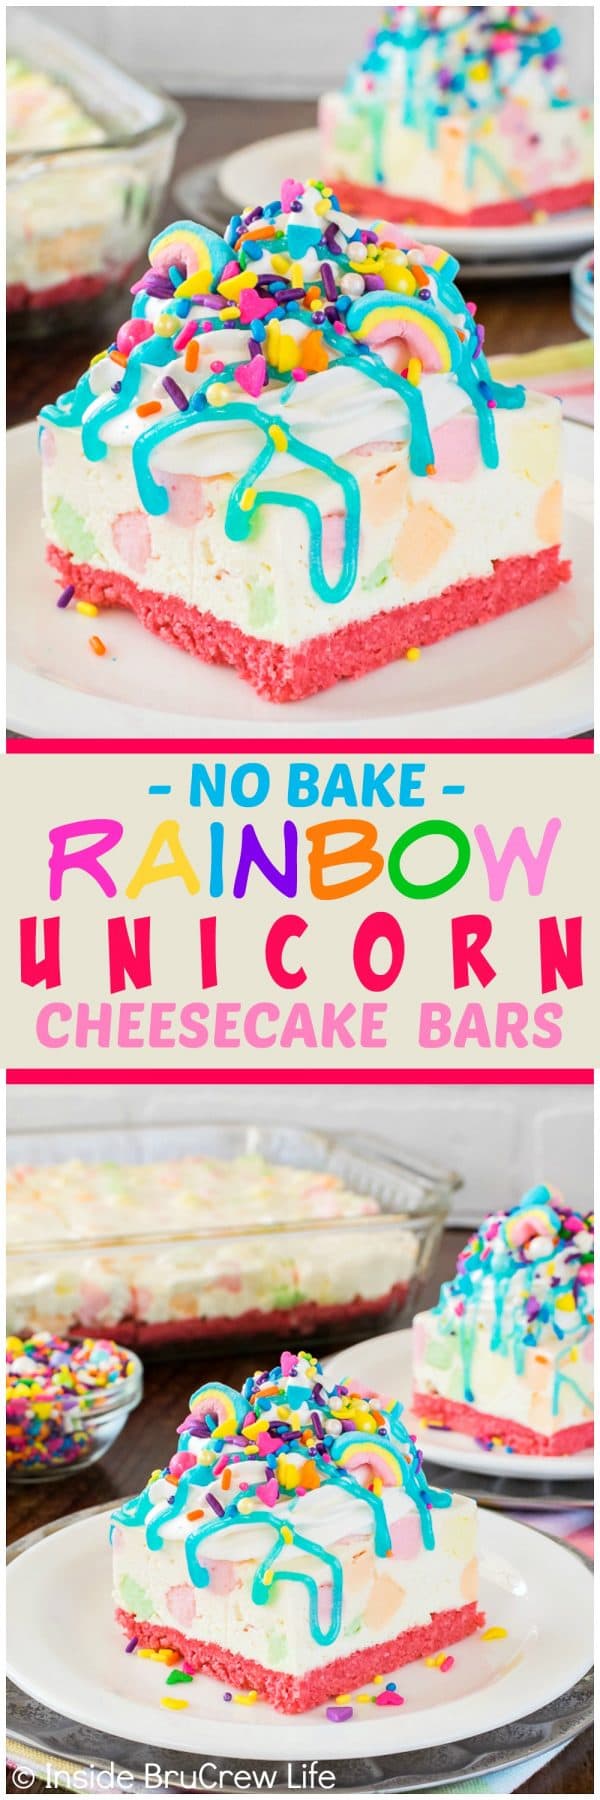 No Bake Rainbow Unicorn Cheesecake Bars - a pink cookie crust, lots of sprinkles, and colorful marshmallows makes this easy dessert recipe perfect for spring parties!